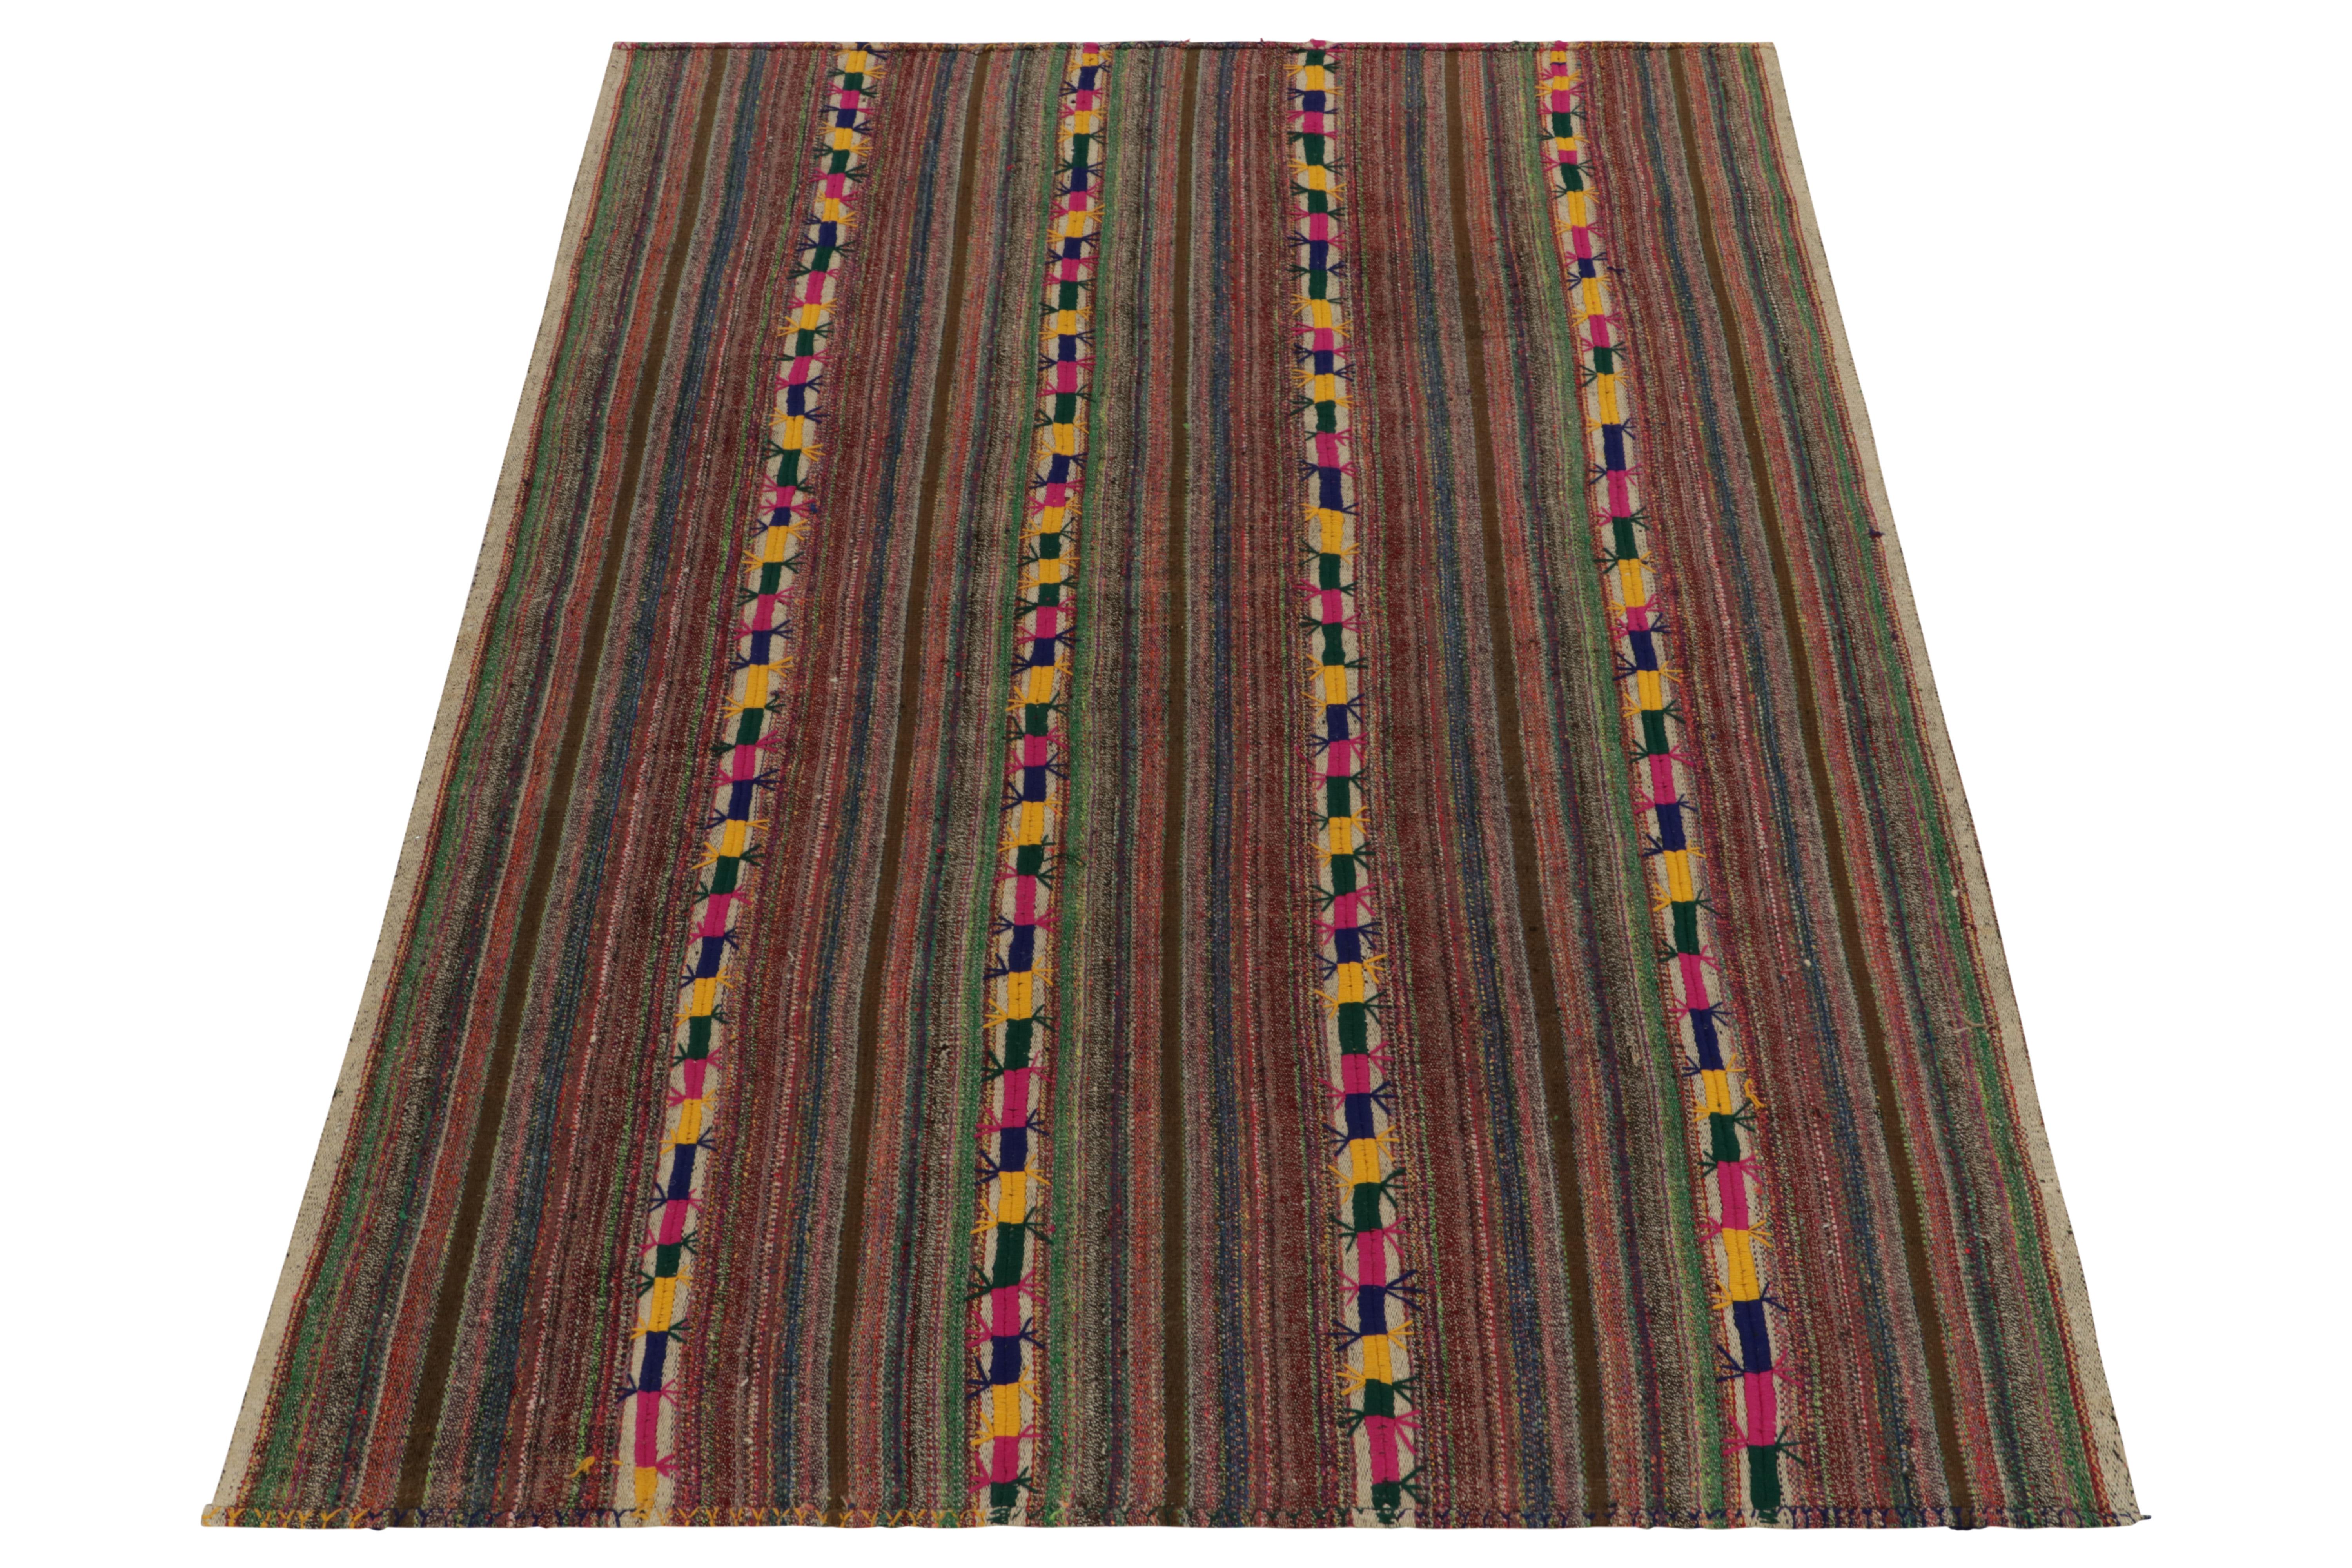 Originating from Turkey circa 1950-1960, a rare type of chaput kilim rug style now entering our Antique & Vintage selections. Characterized by fine detailing with the colors within the polychromatic stripes, the playful piece welcomes a departure